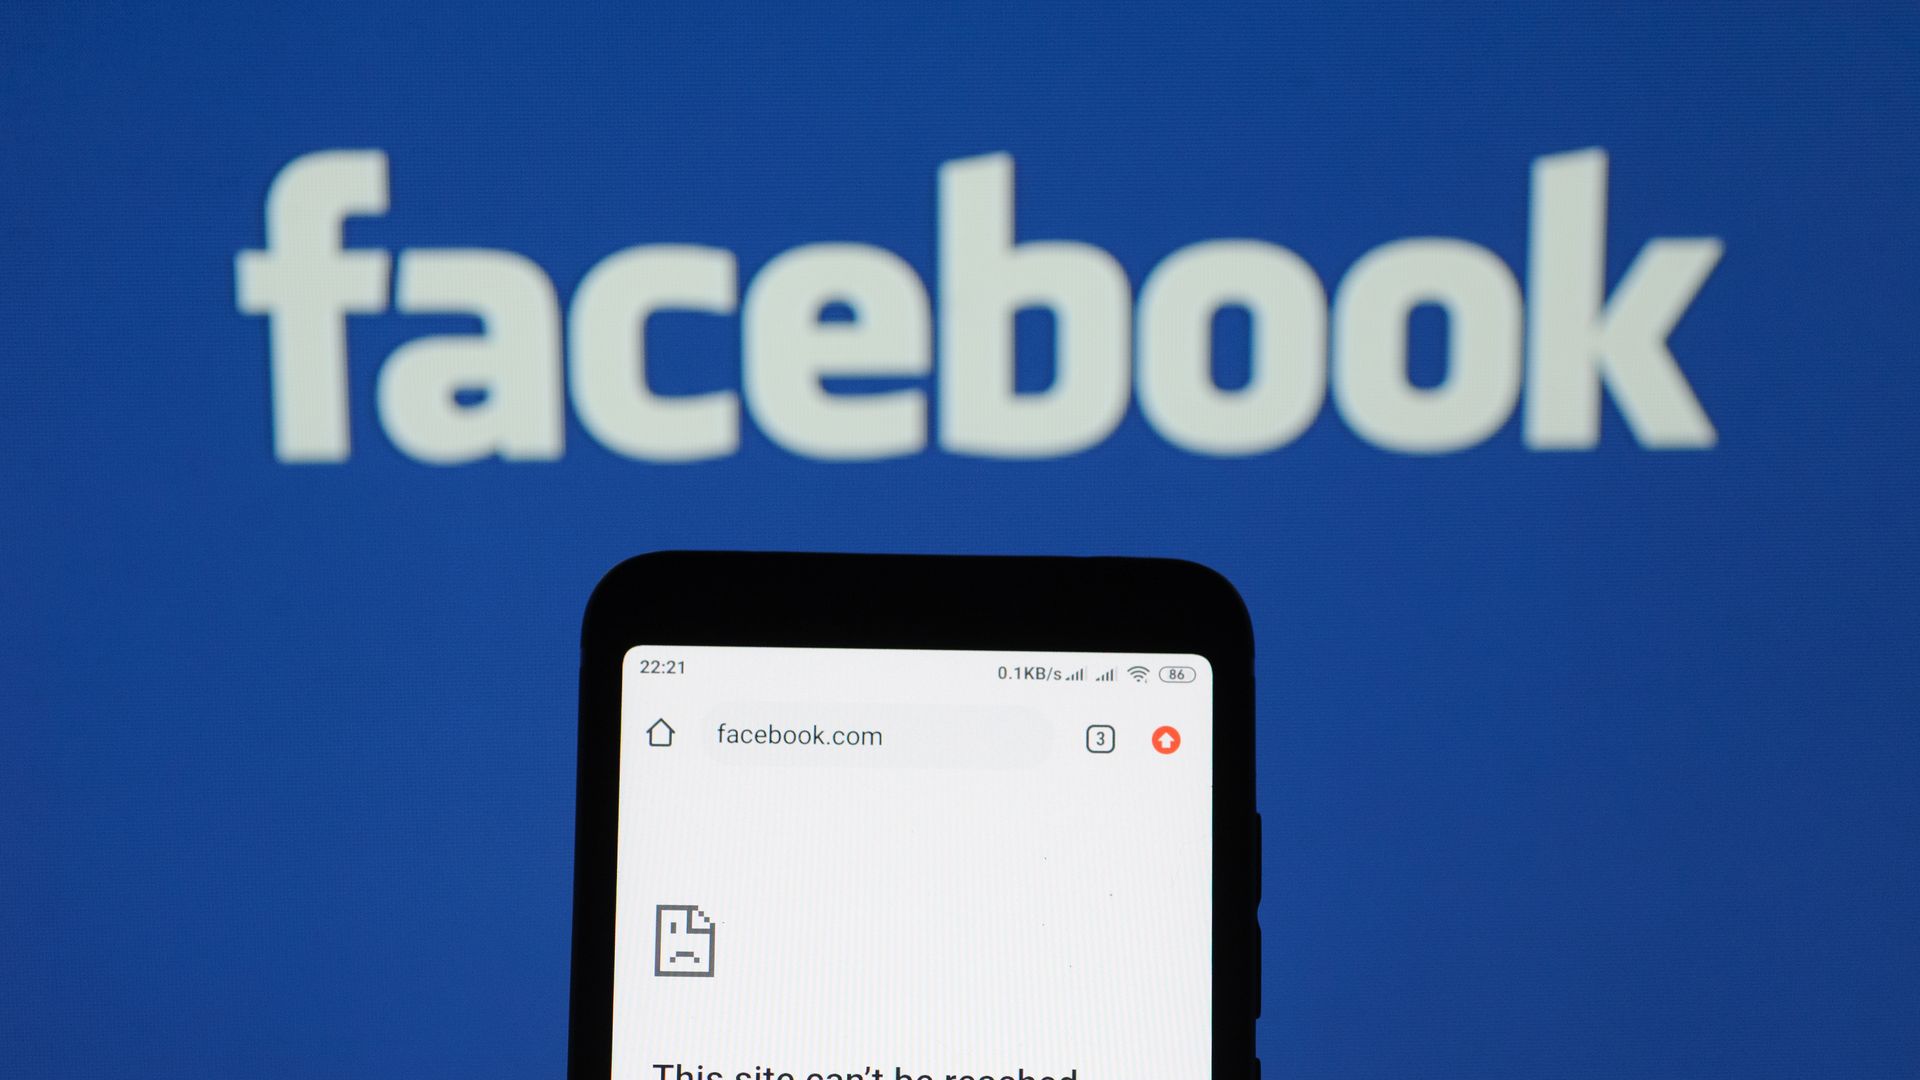 The Facebook logo with a phone struggling to reach the website